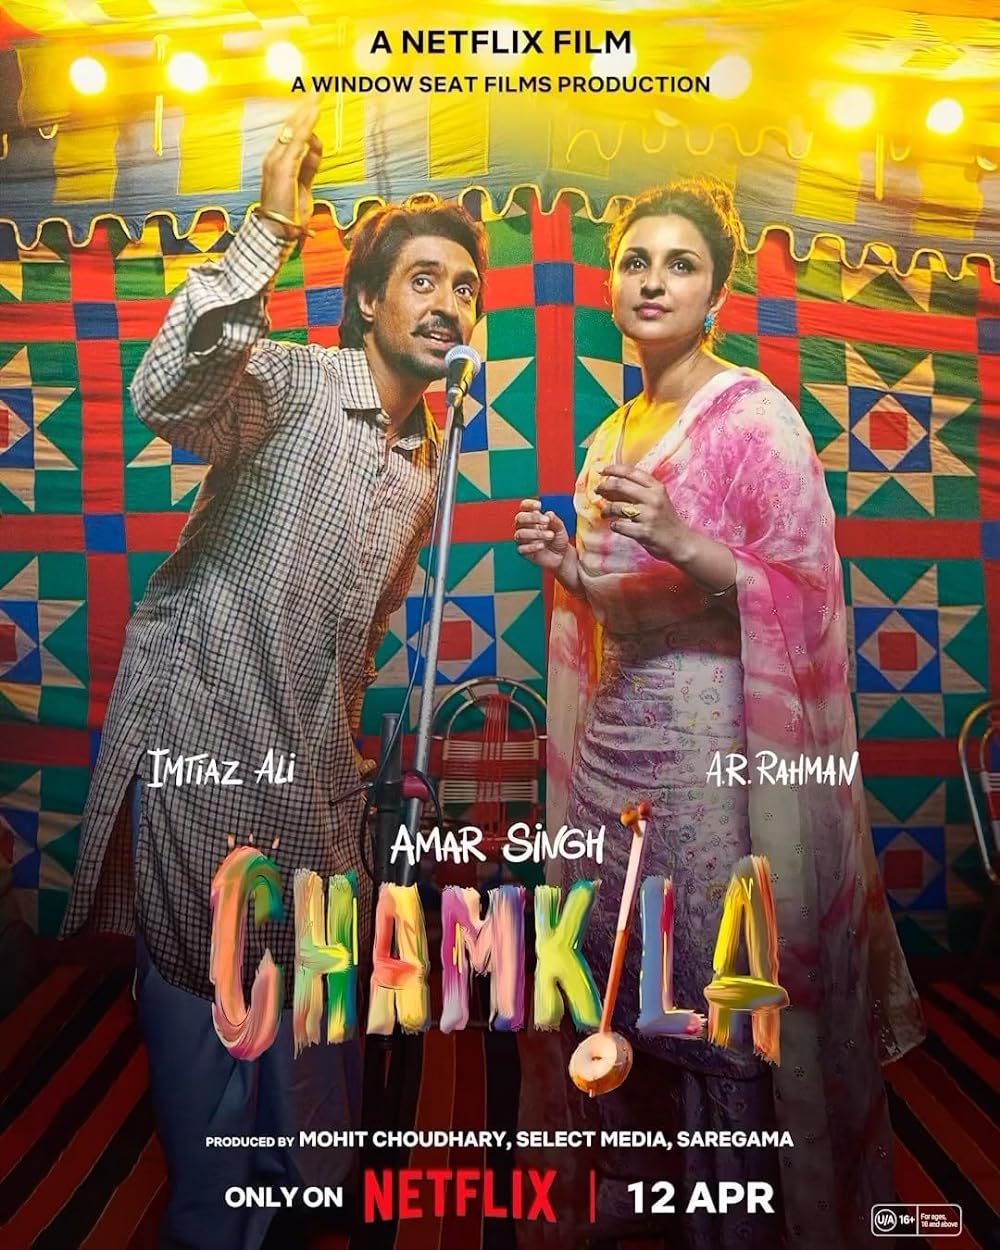 Amar Singh Chamkila - April 12 (Netflix)Experience the life story of the late musician Amar Singh Chamkila in this biopic starring Diljit Dosanjh and Parineeti Chopra. 'Amar Singh Chamkila' chronicles the highs and lows of Chamkila's career, his musical collaborations, and his enduring legacy in Punjab's music scene.